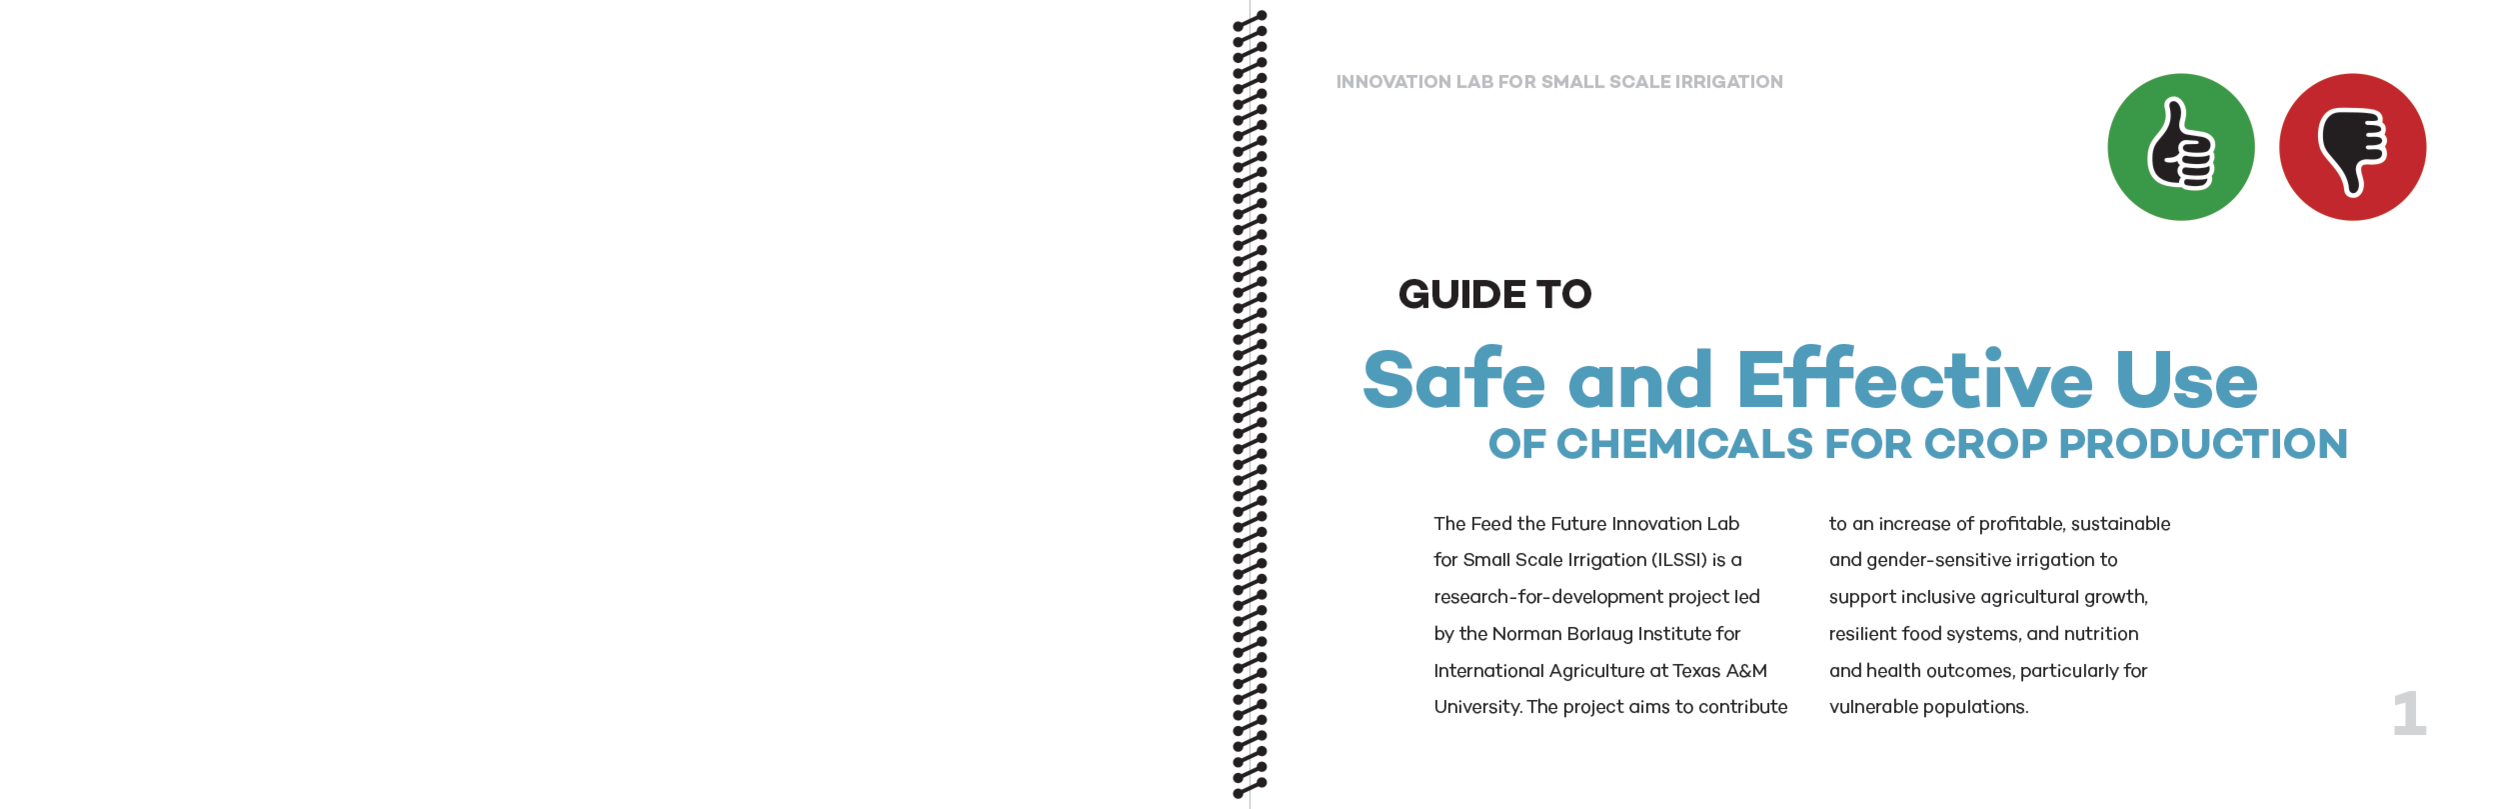 Africa-Agrochemical-Safety-Guide_030122-2.png